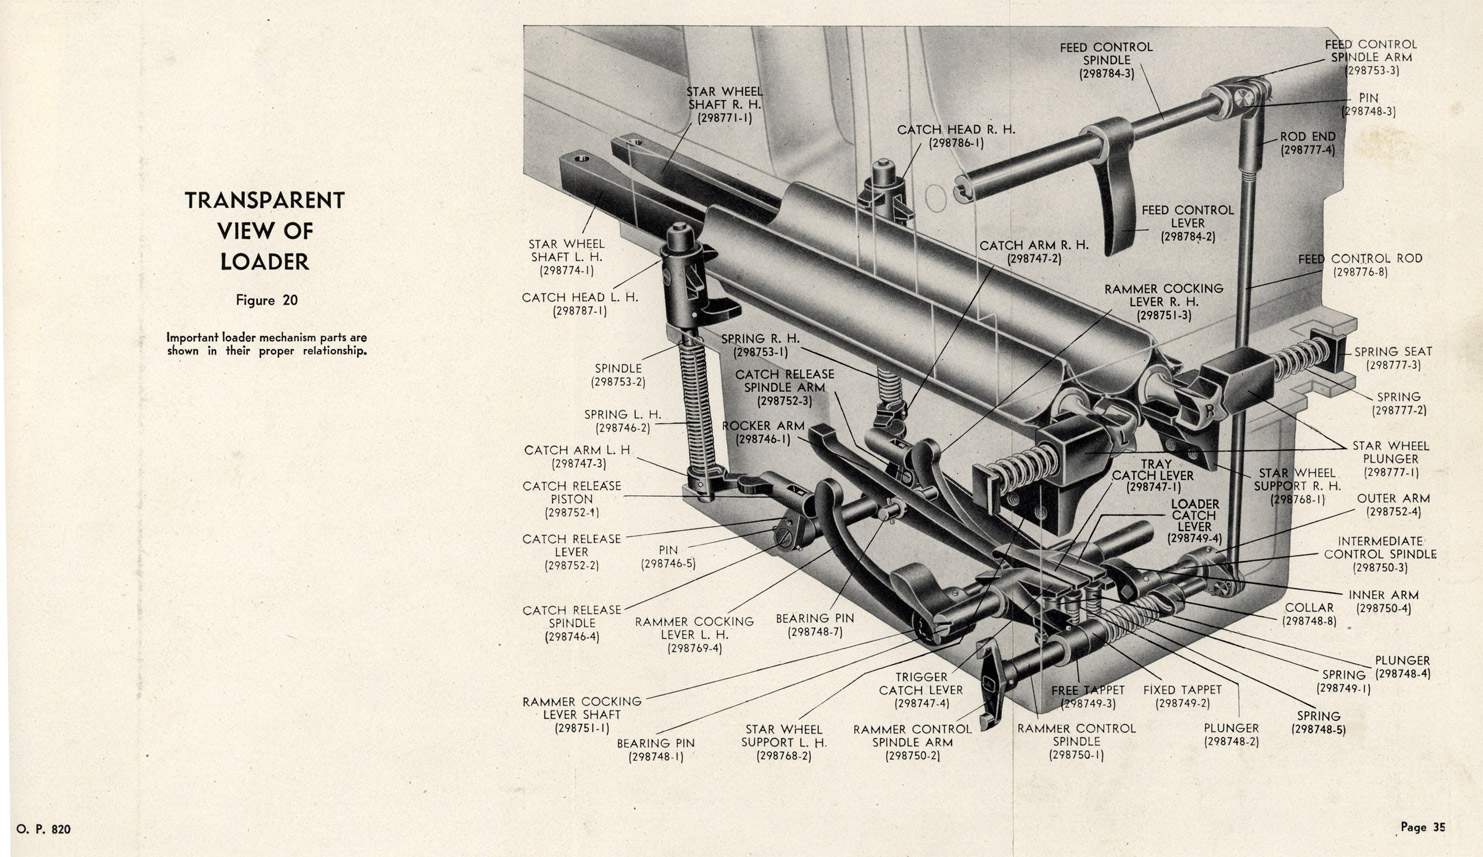 
Transparent view of loader.
Figure 20
Important loader mechanism parts are shown in their proper relationship.
Page 35